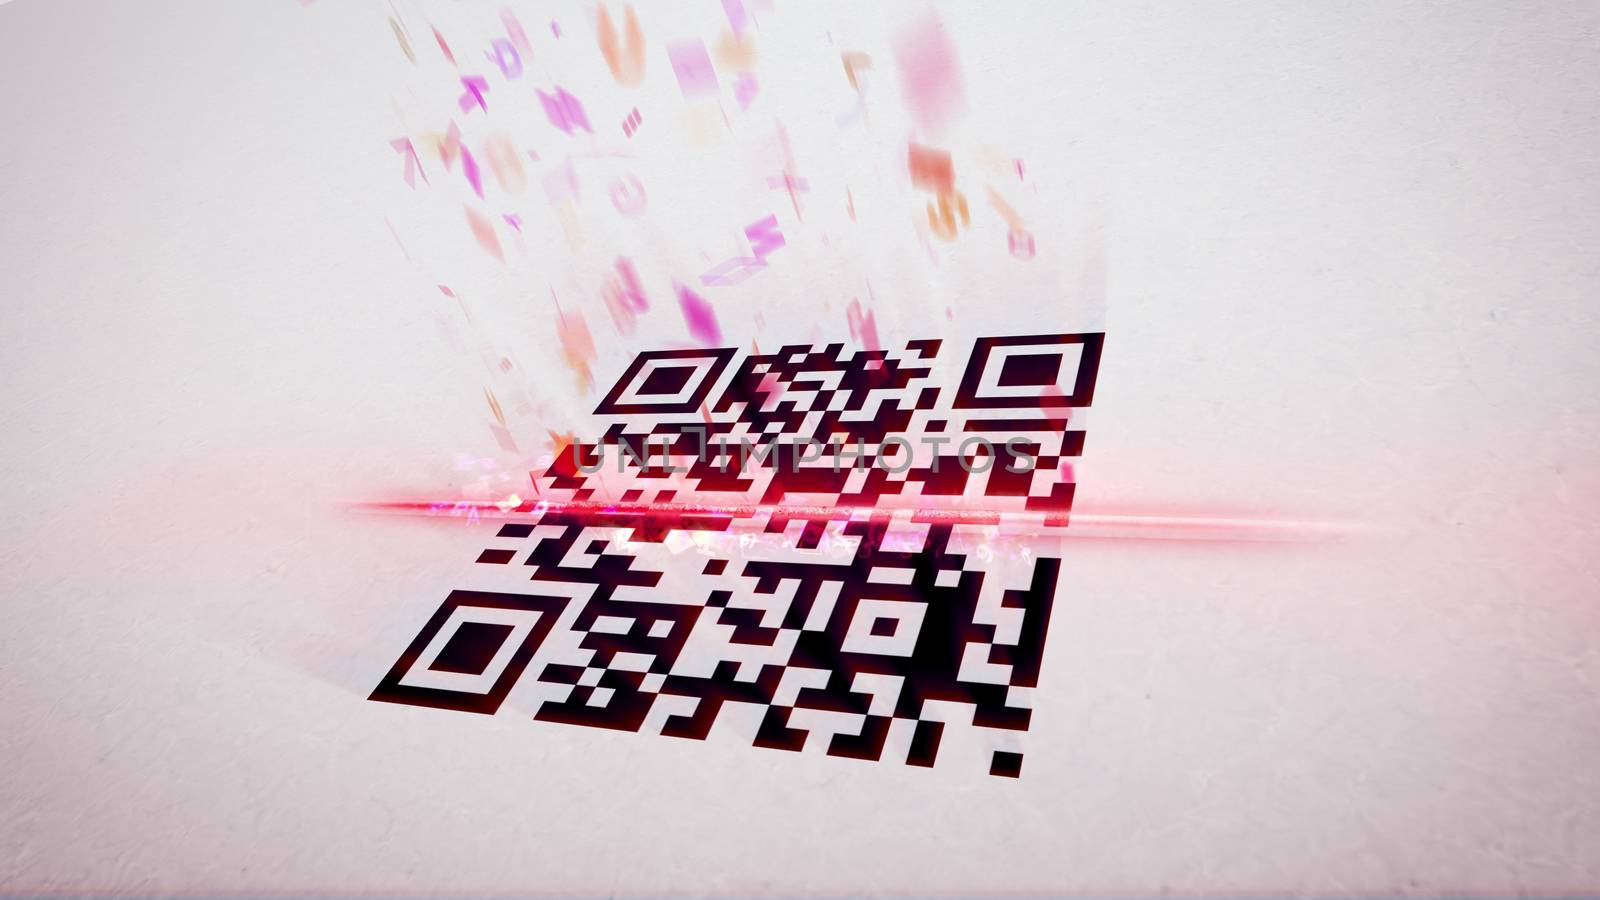 Arty 3d rendering of an abstract QR code scanning illustration put askew with flying up symbols, numbers, and figures of a rosy color. The black and white code is crossed with a red laser line